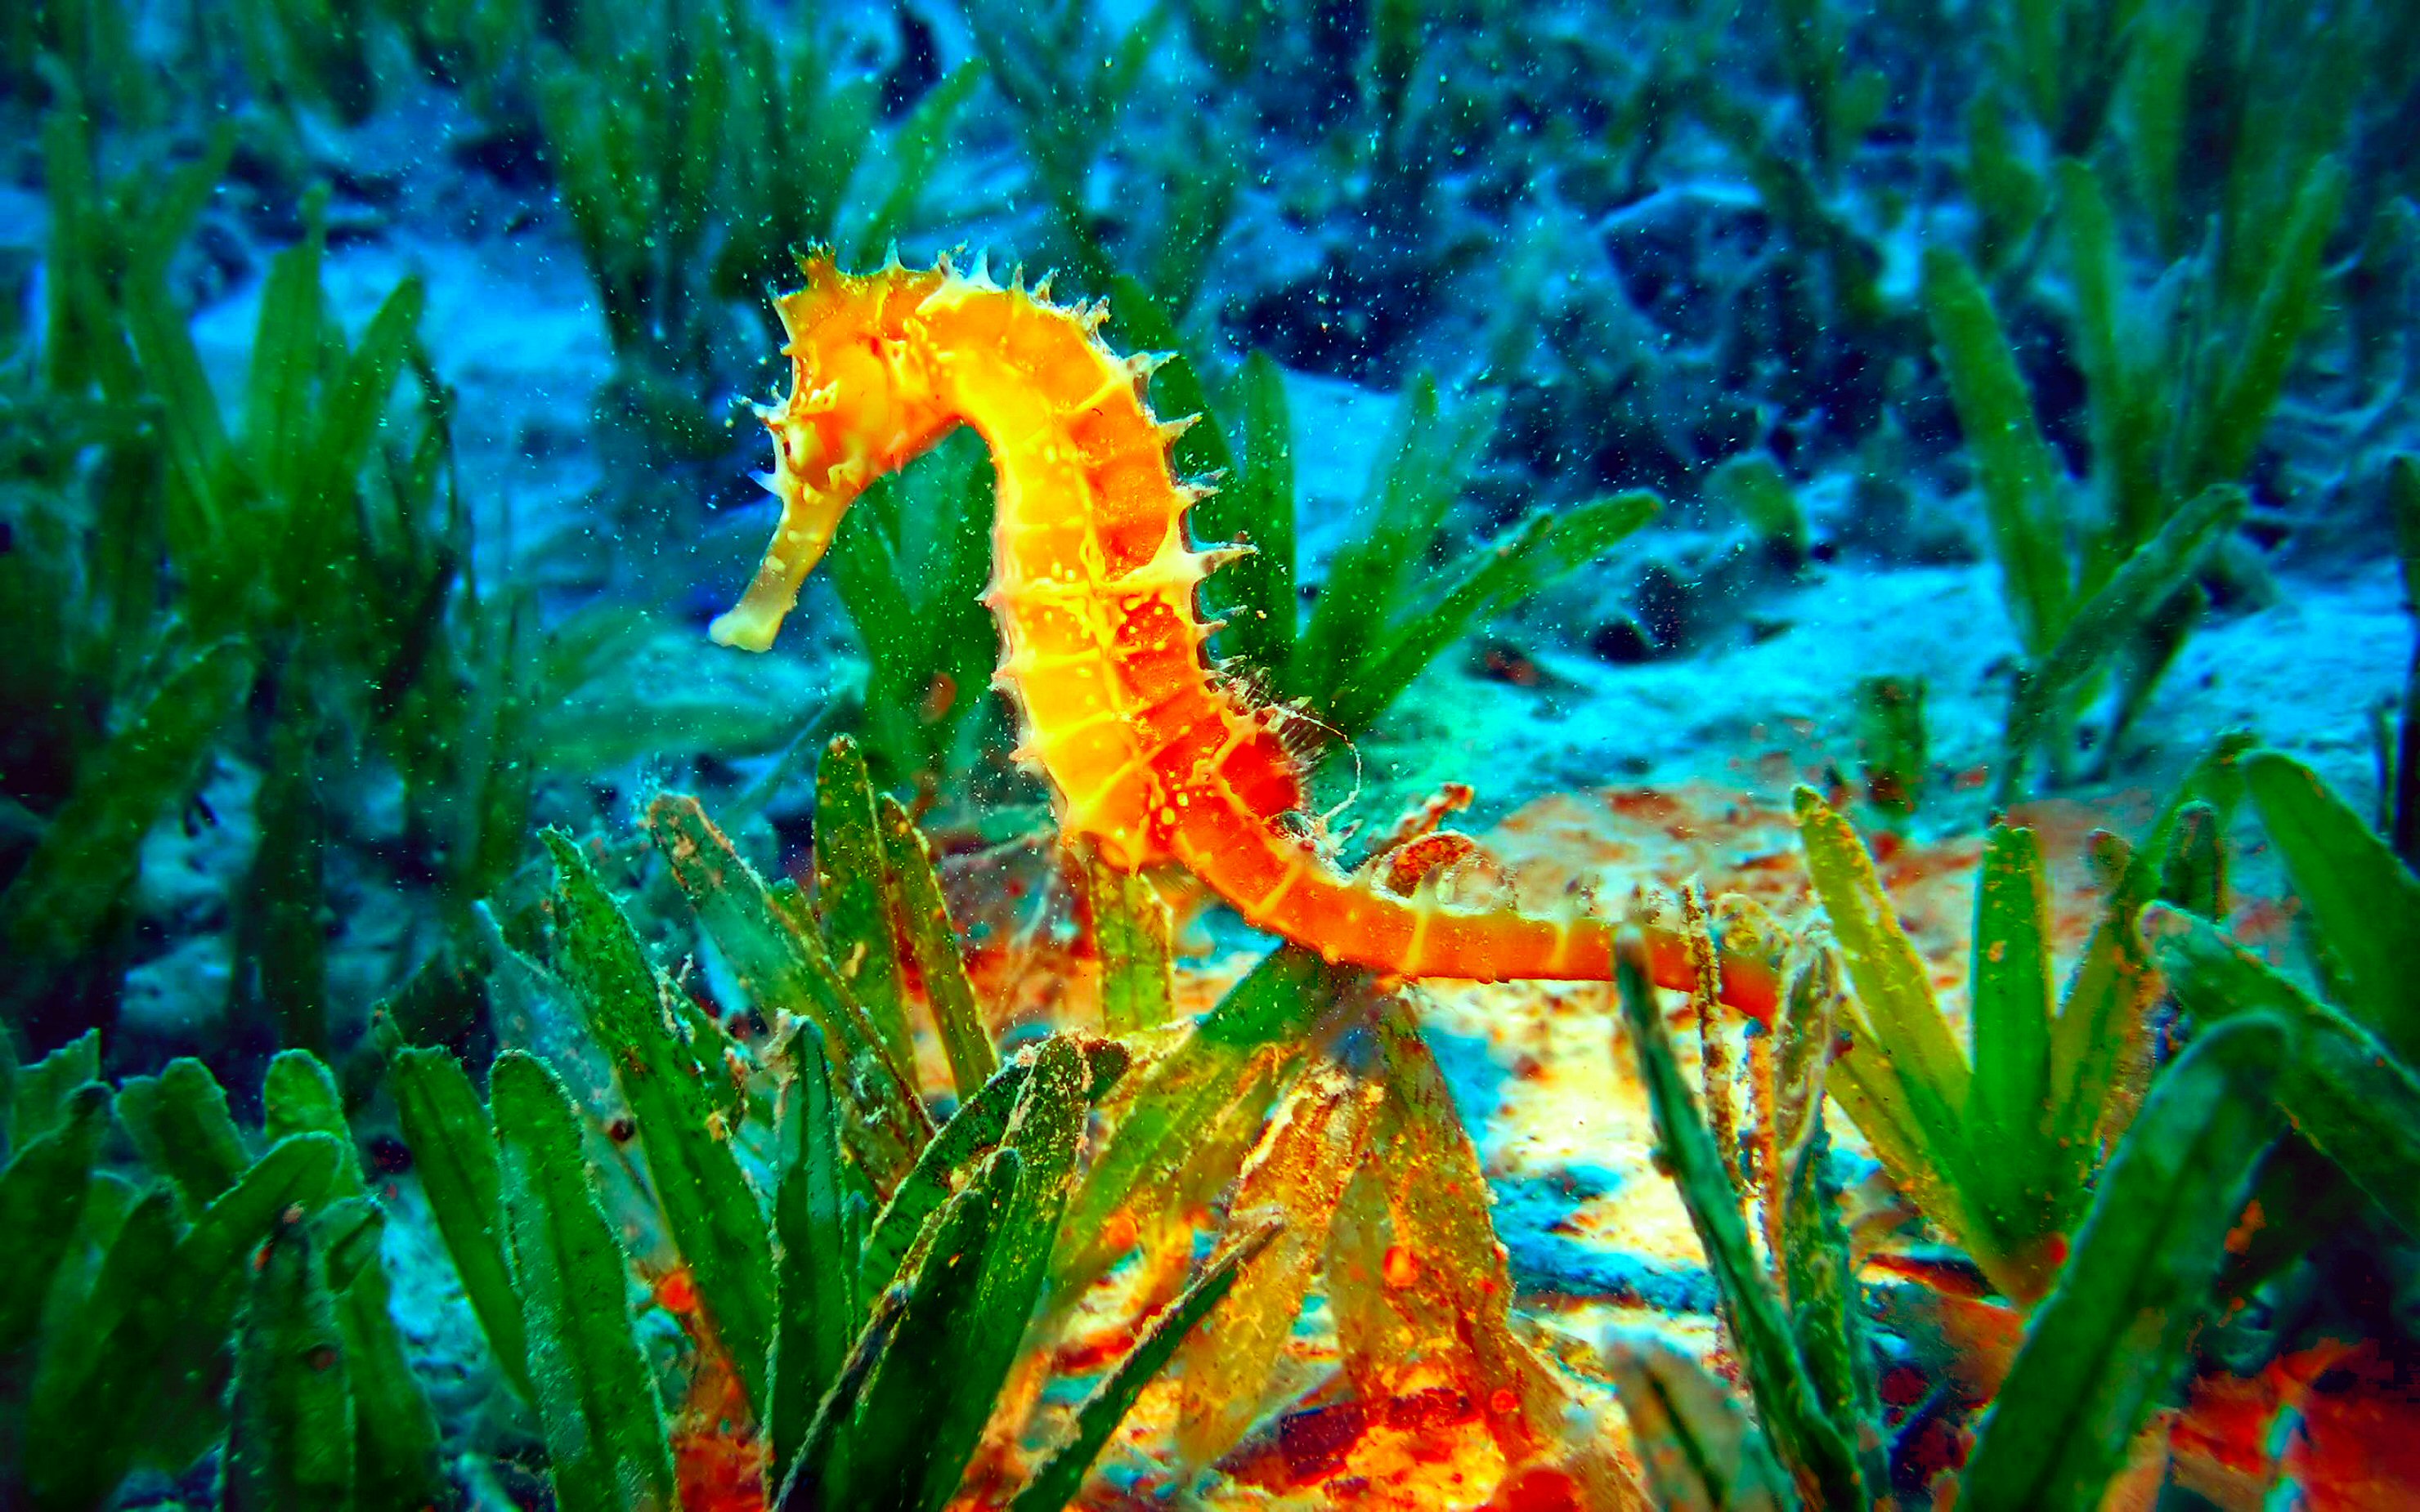 Bright Seahorse Photo And Wallpaper Cute Pictures